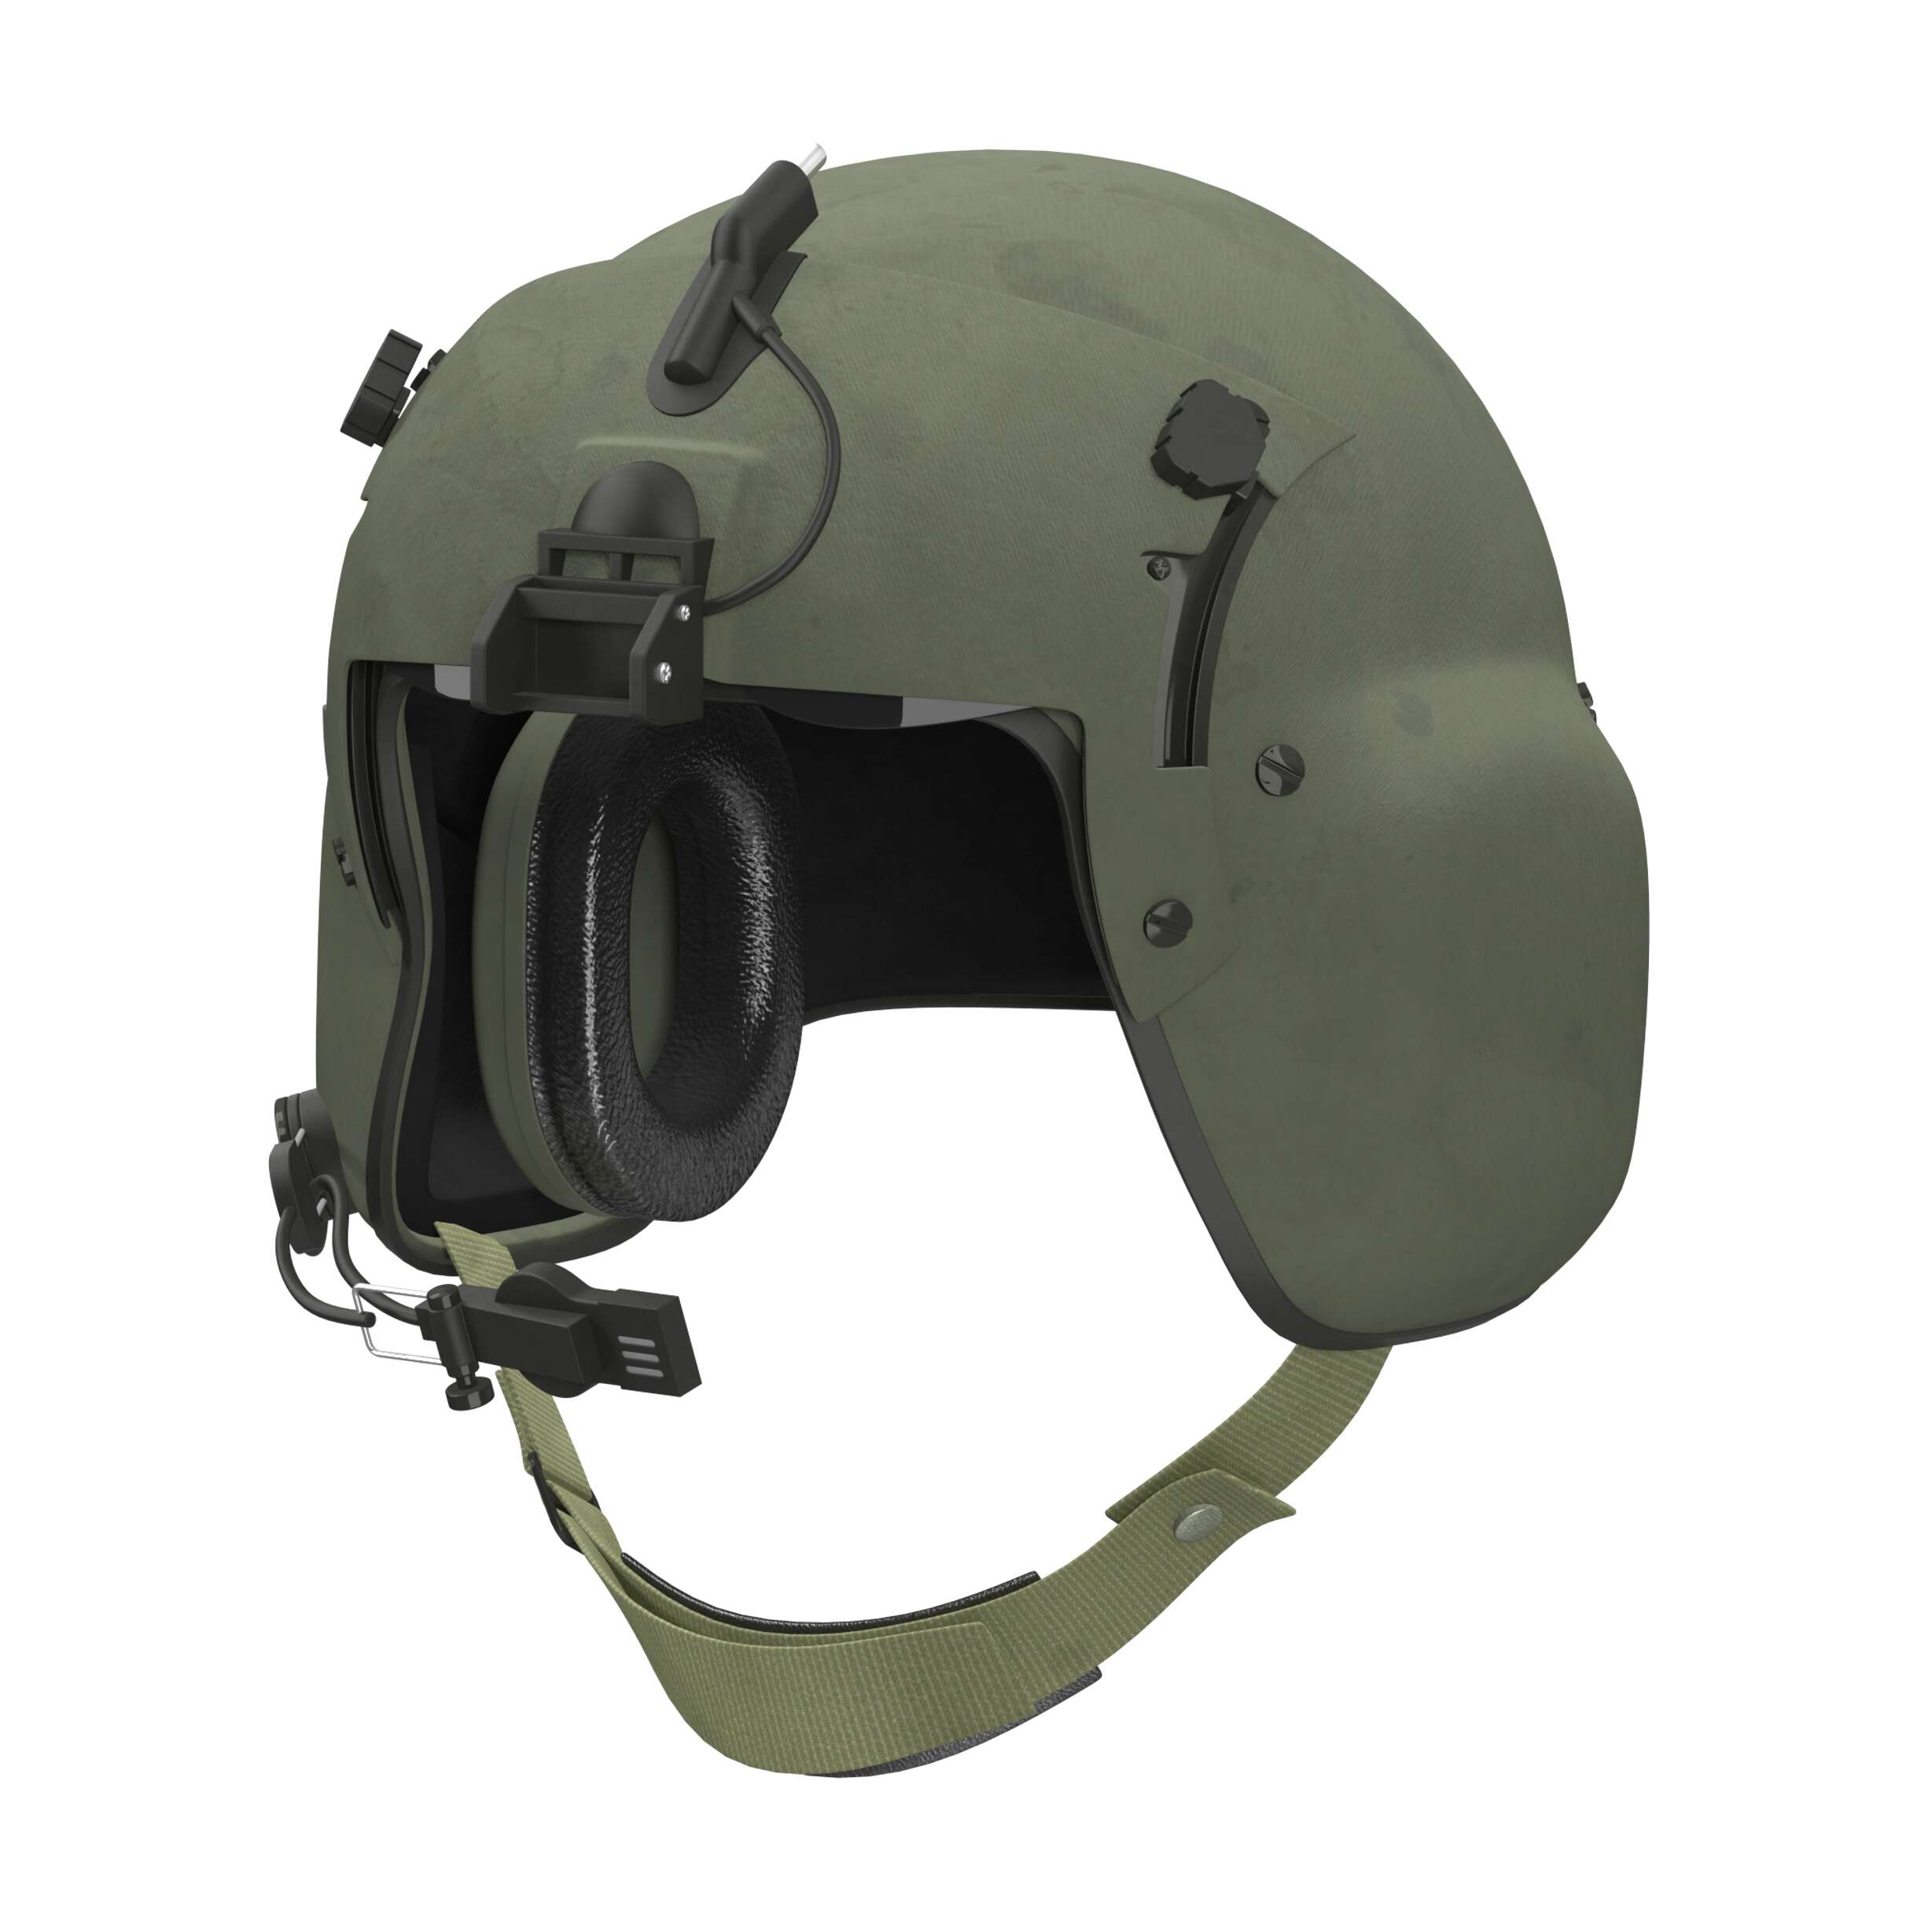 Helicopter Pilots Helmet for sale in UK | 51 used Helicopter Pilots Helmets